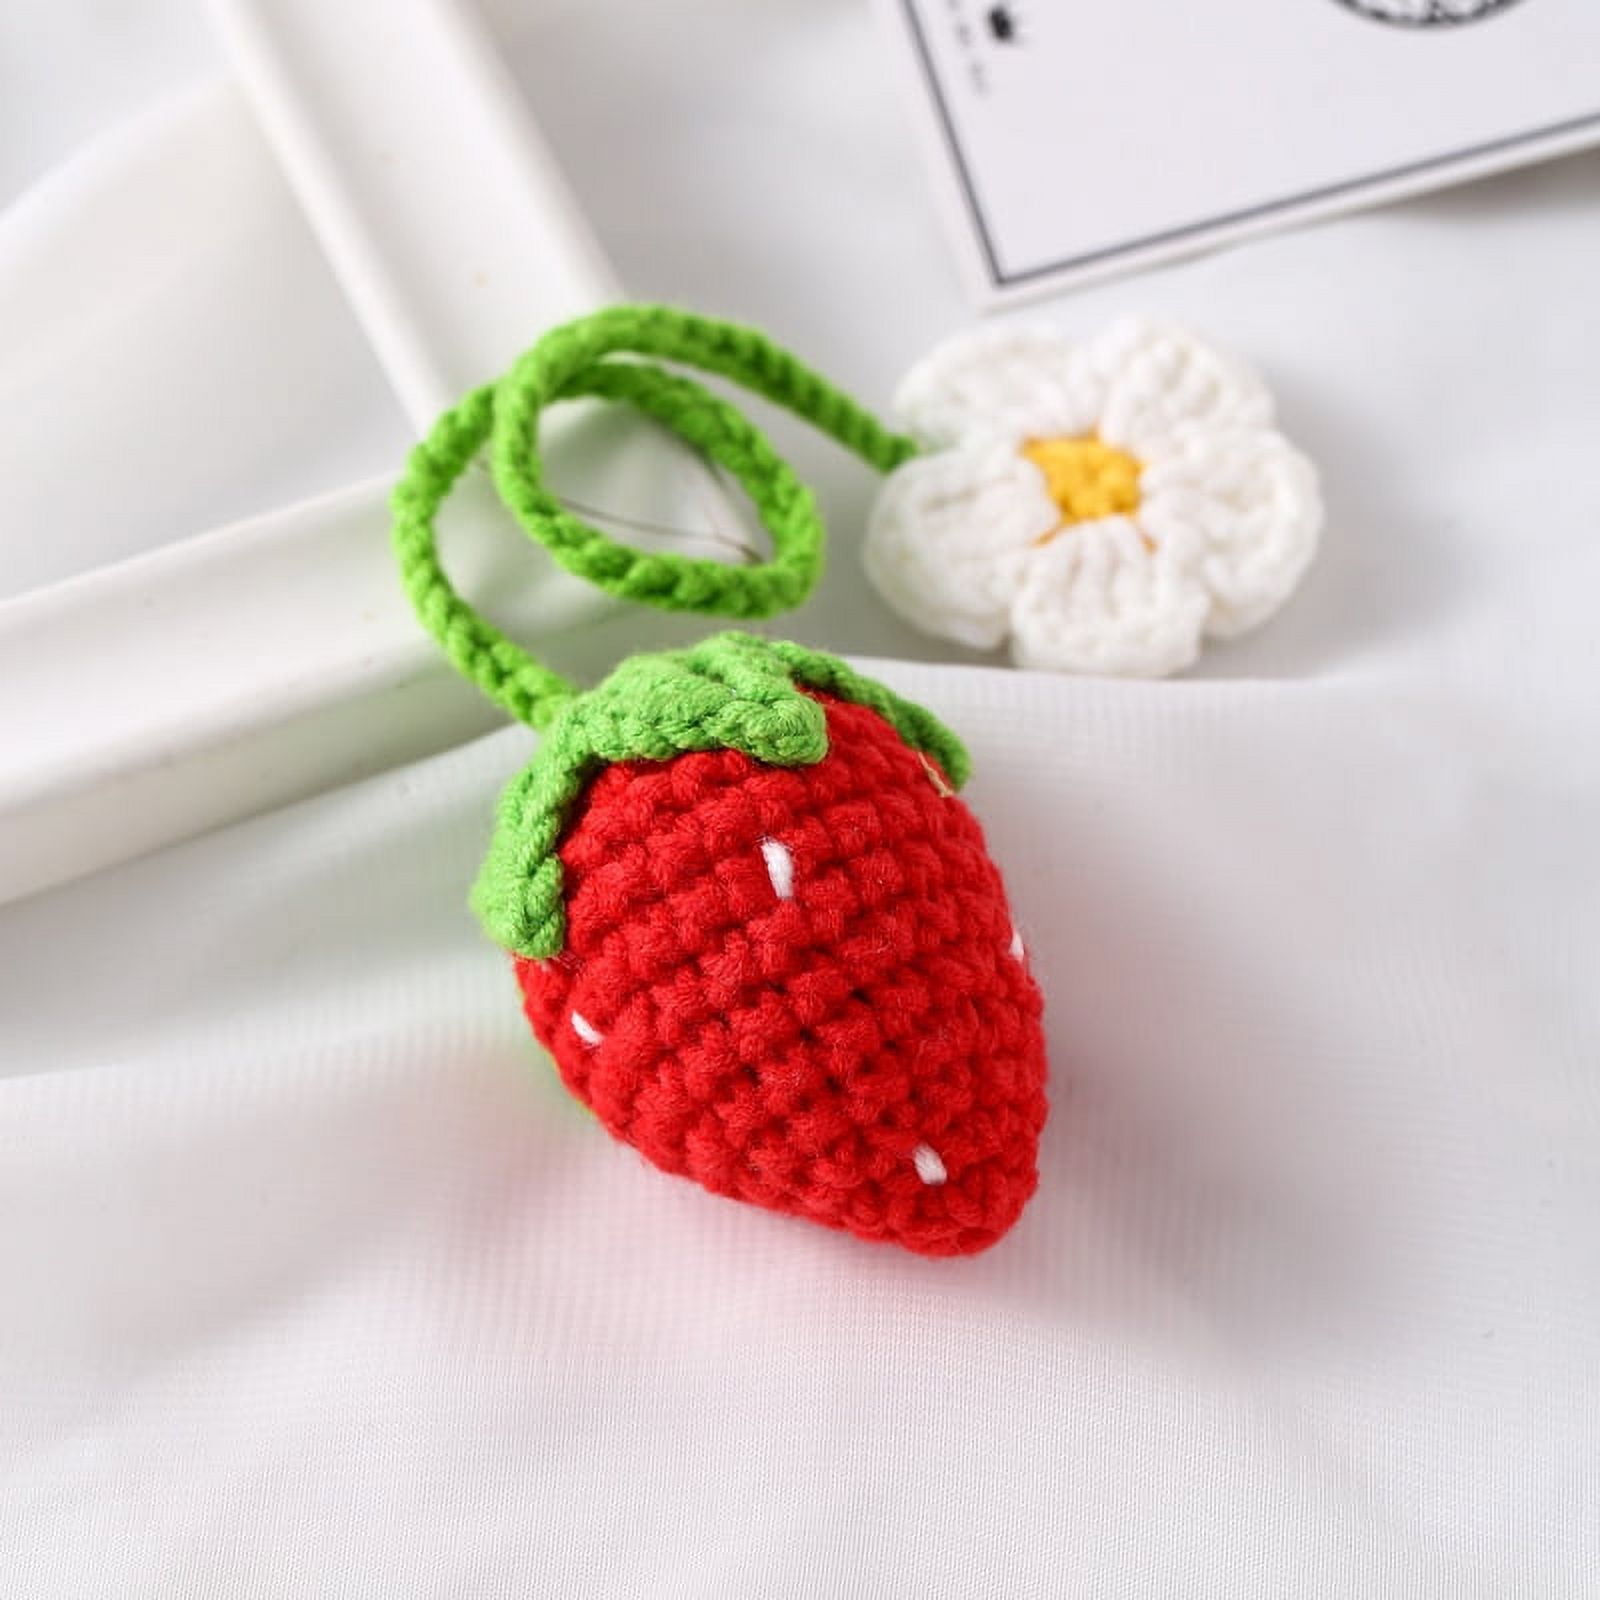 Fruit Salad Accessories for Keychains and Appliqués Crochet